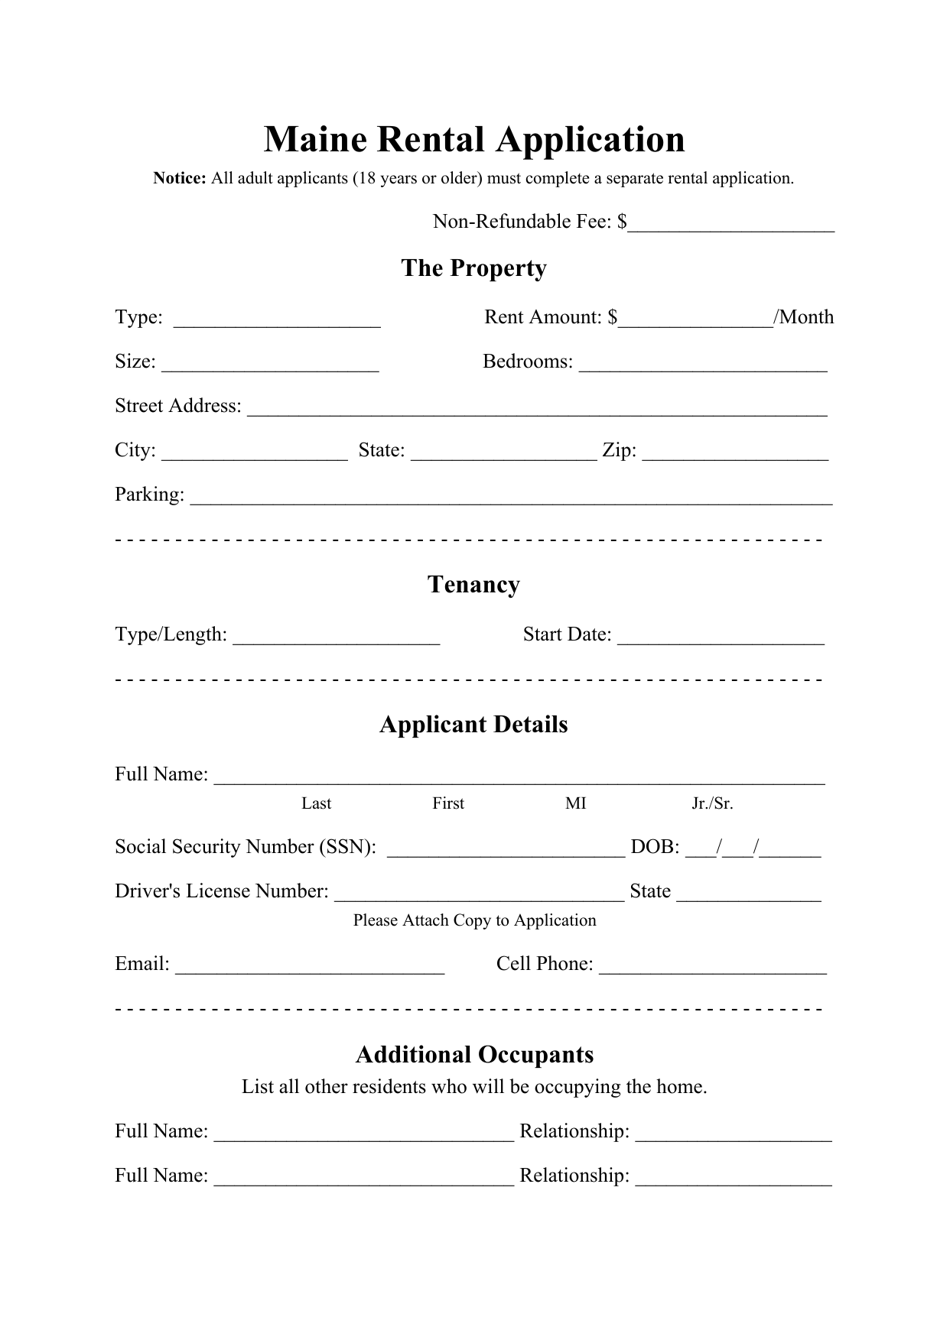 Rental Application Form - Maine, Page 1